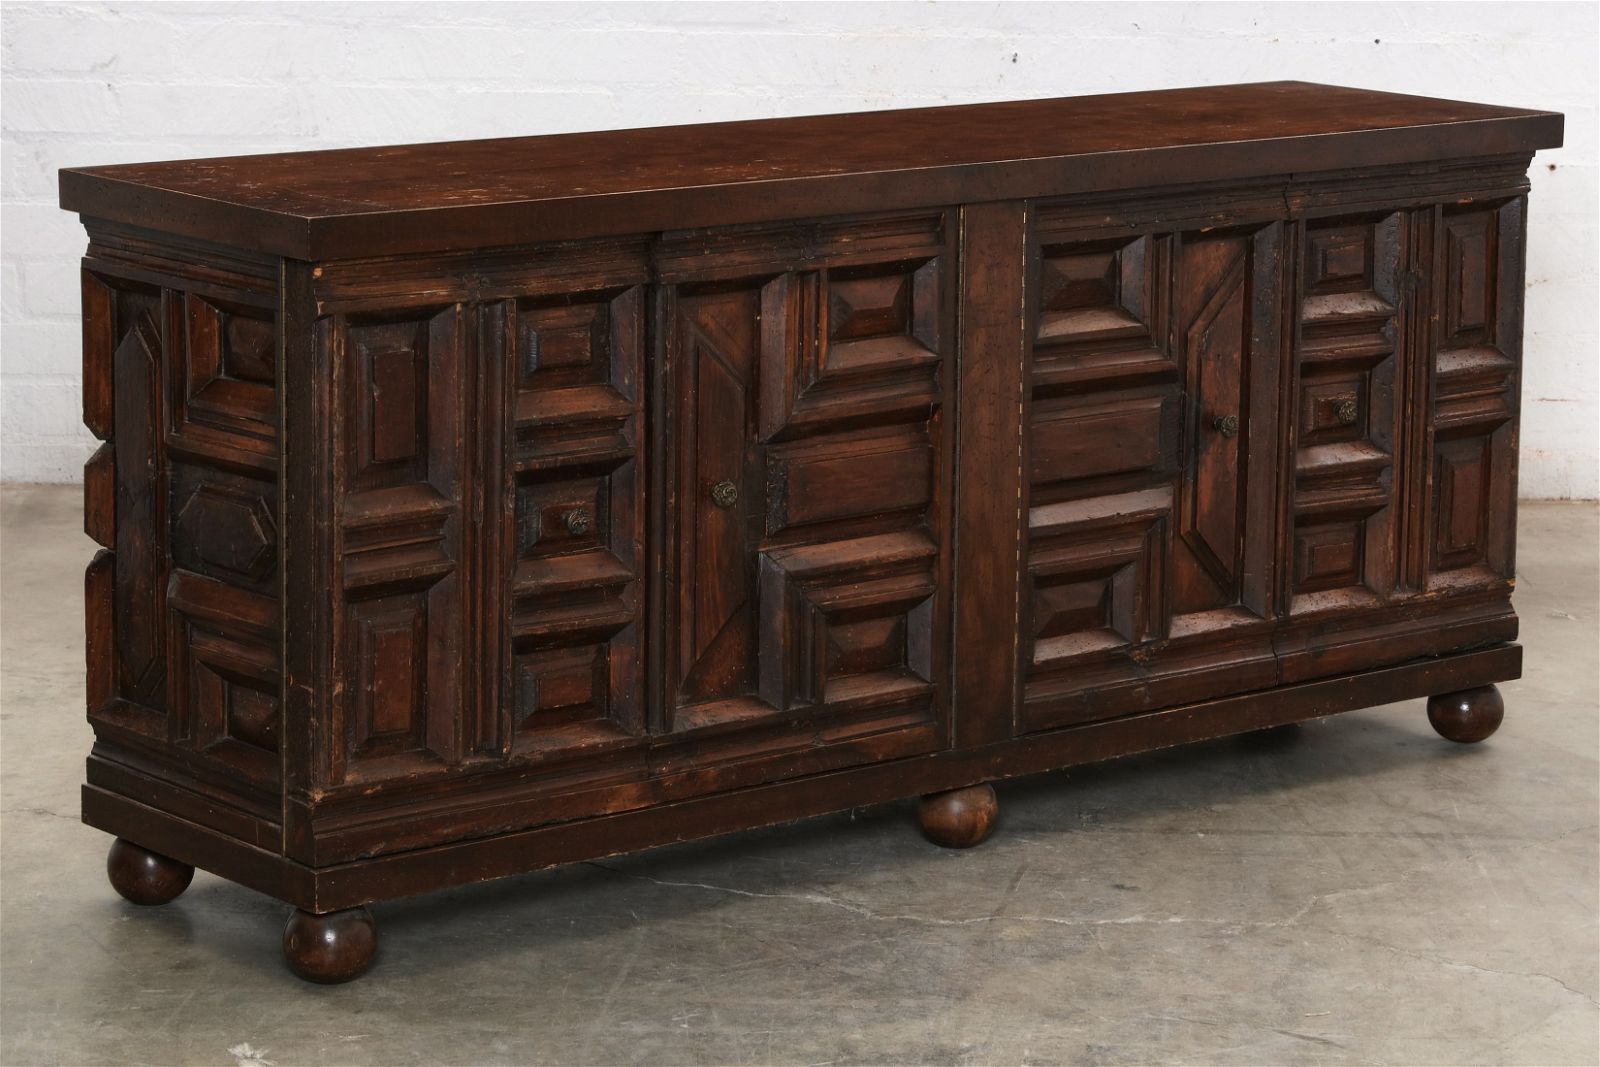 A BAROQUE STYLE RUSTIC STAINED